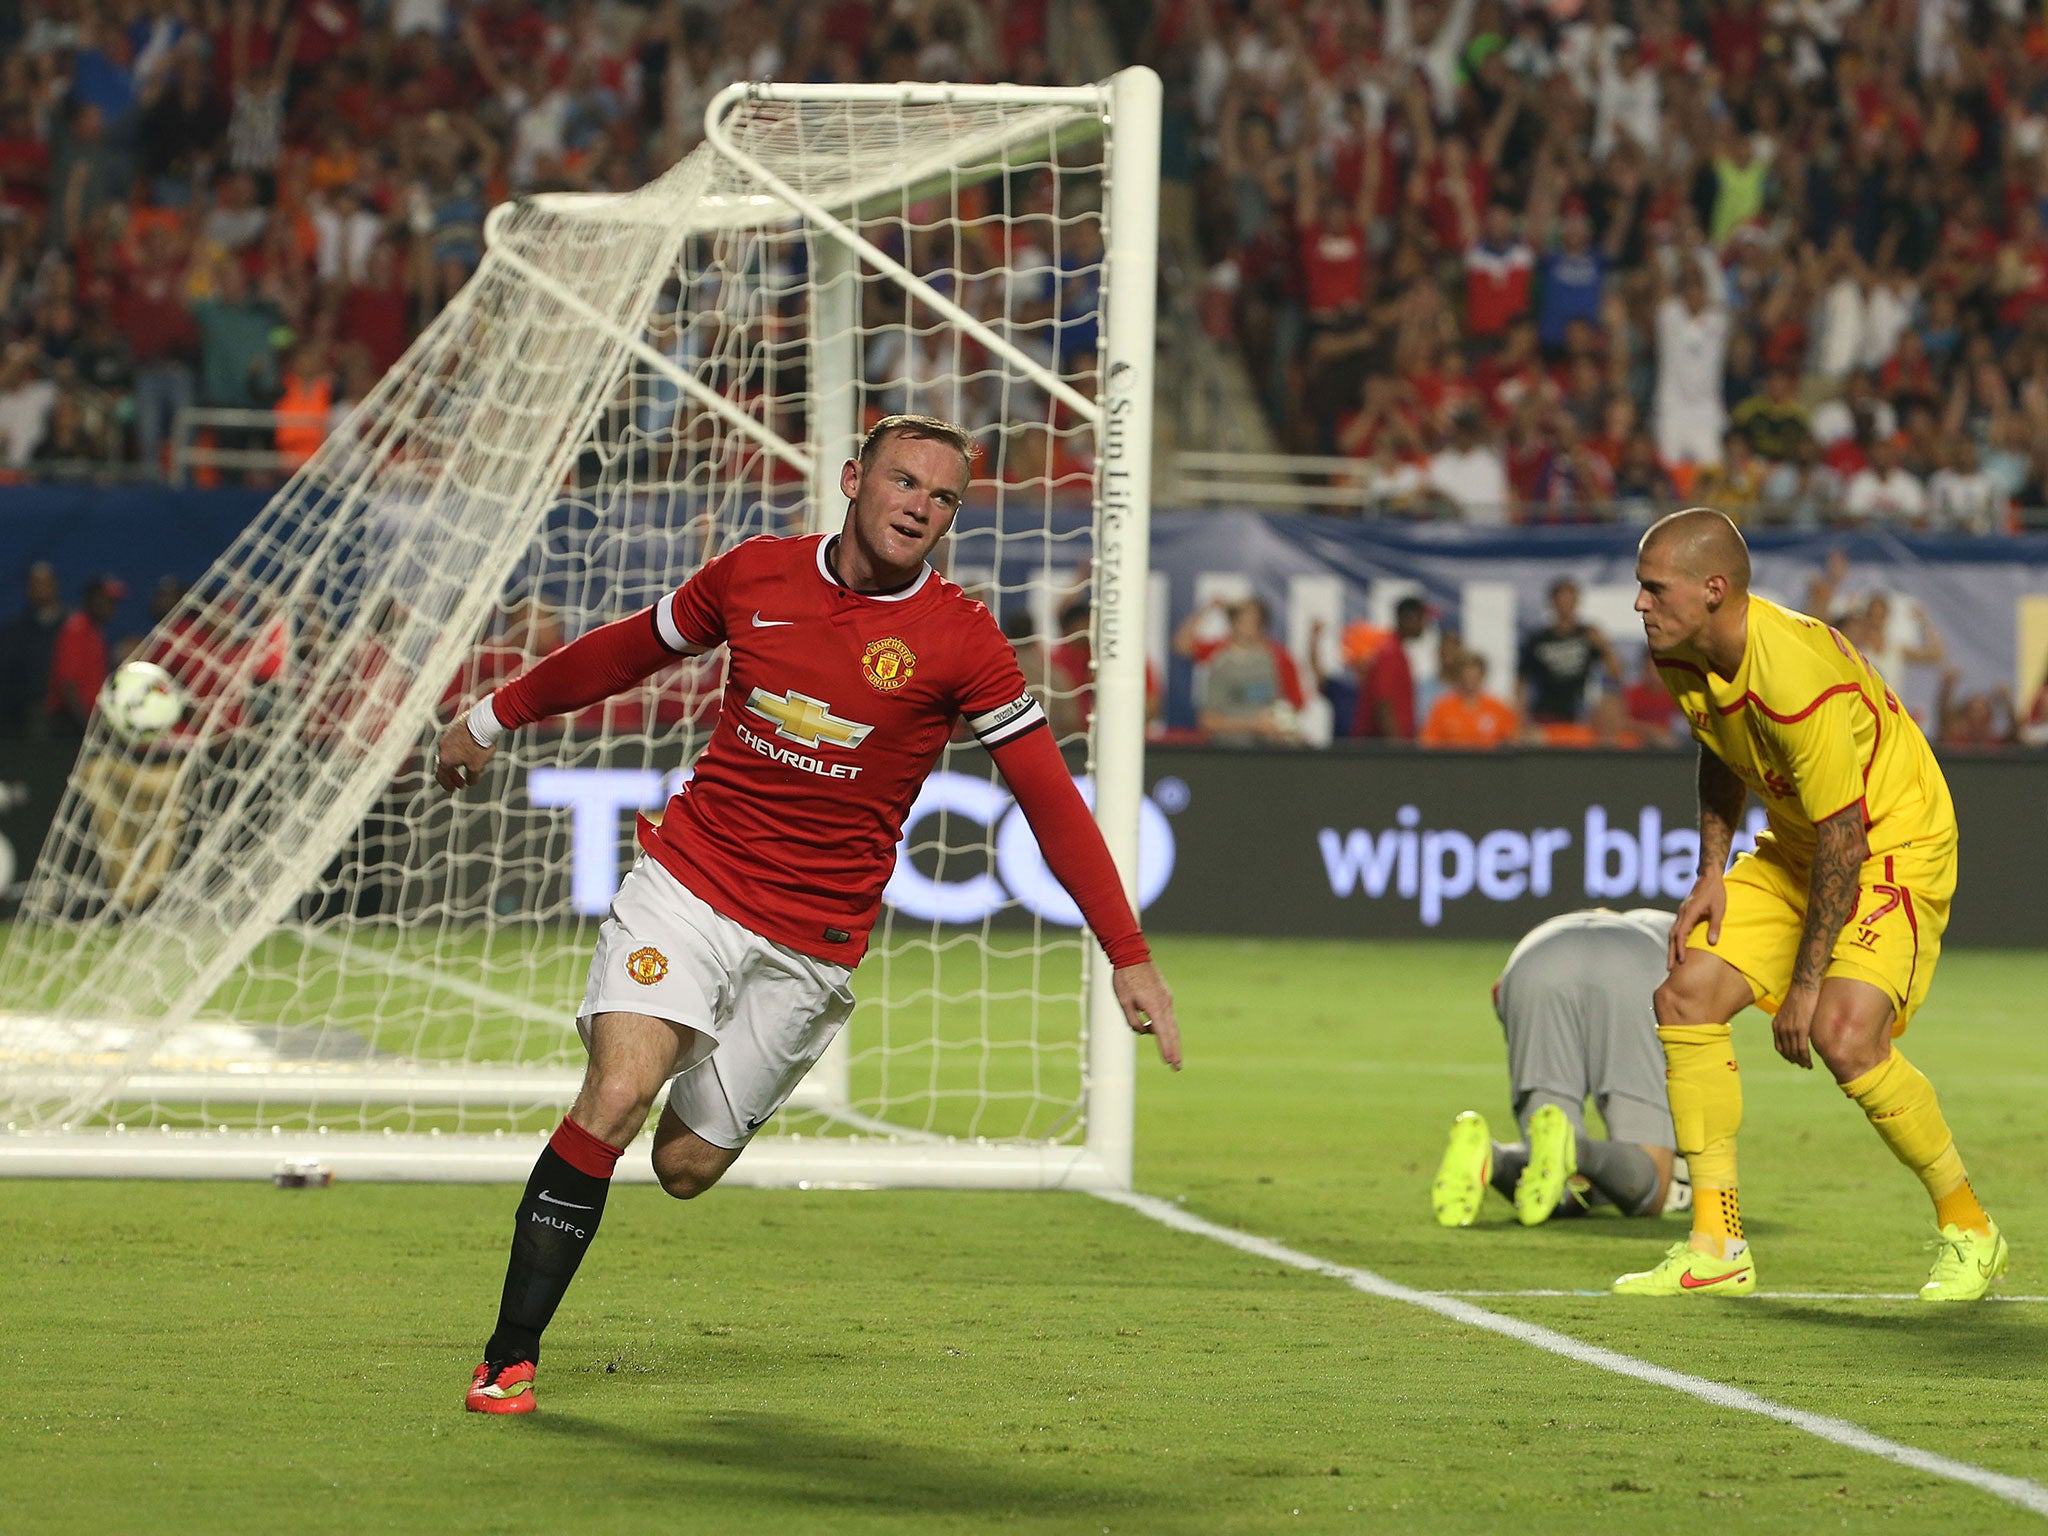 Rooney equalised with a brilliant volley